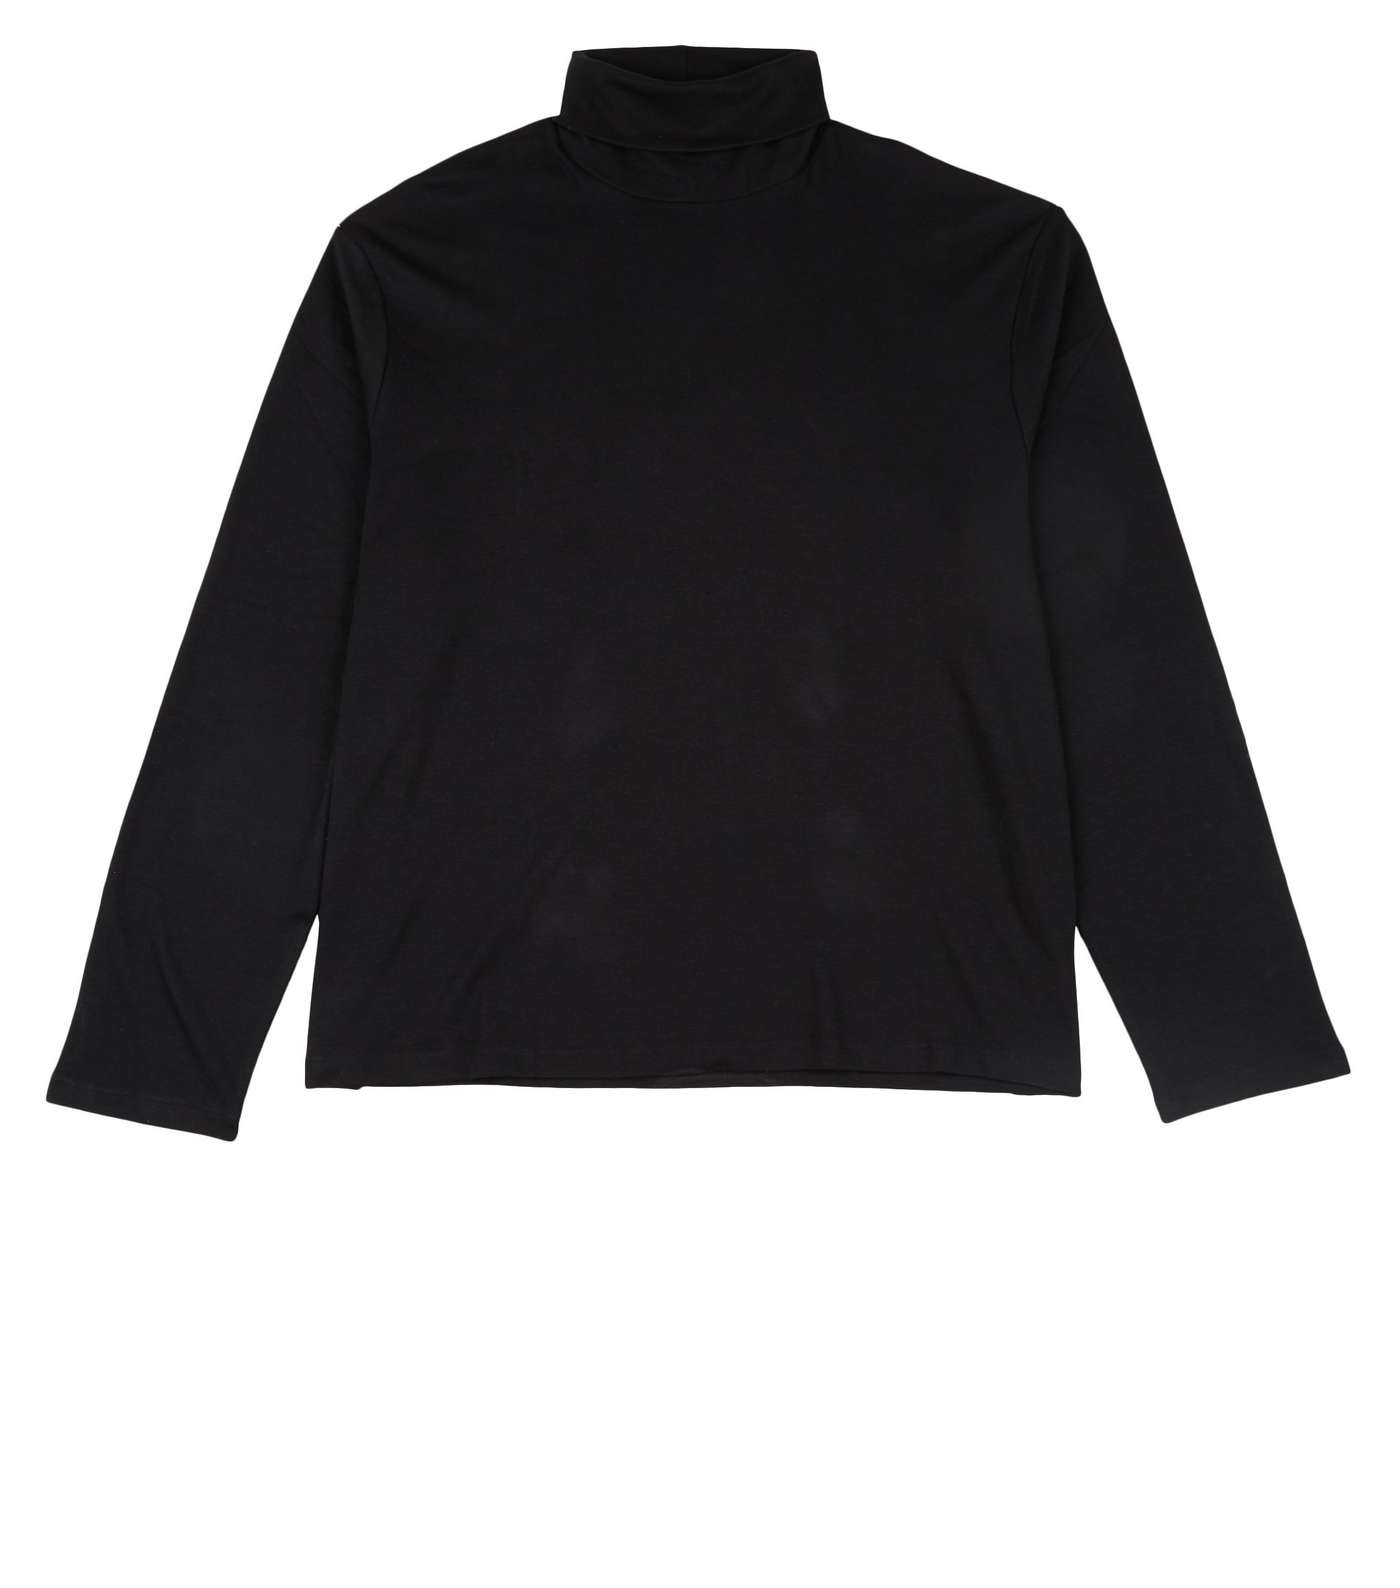 Plus Size Black Long Sleeve Roll Neck Top Image 4